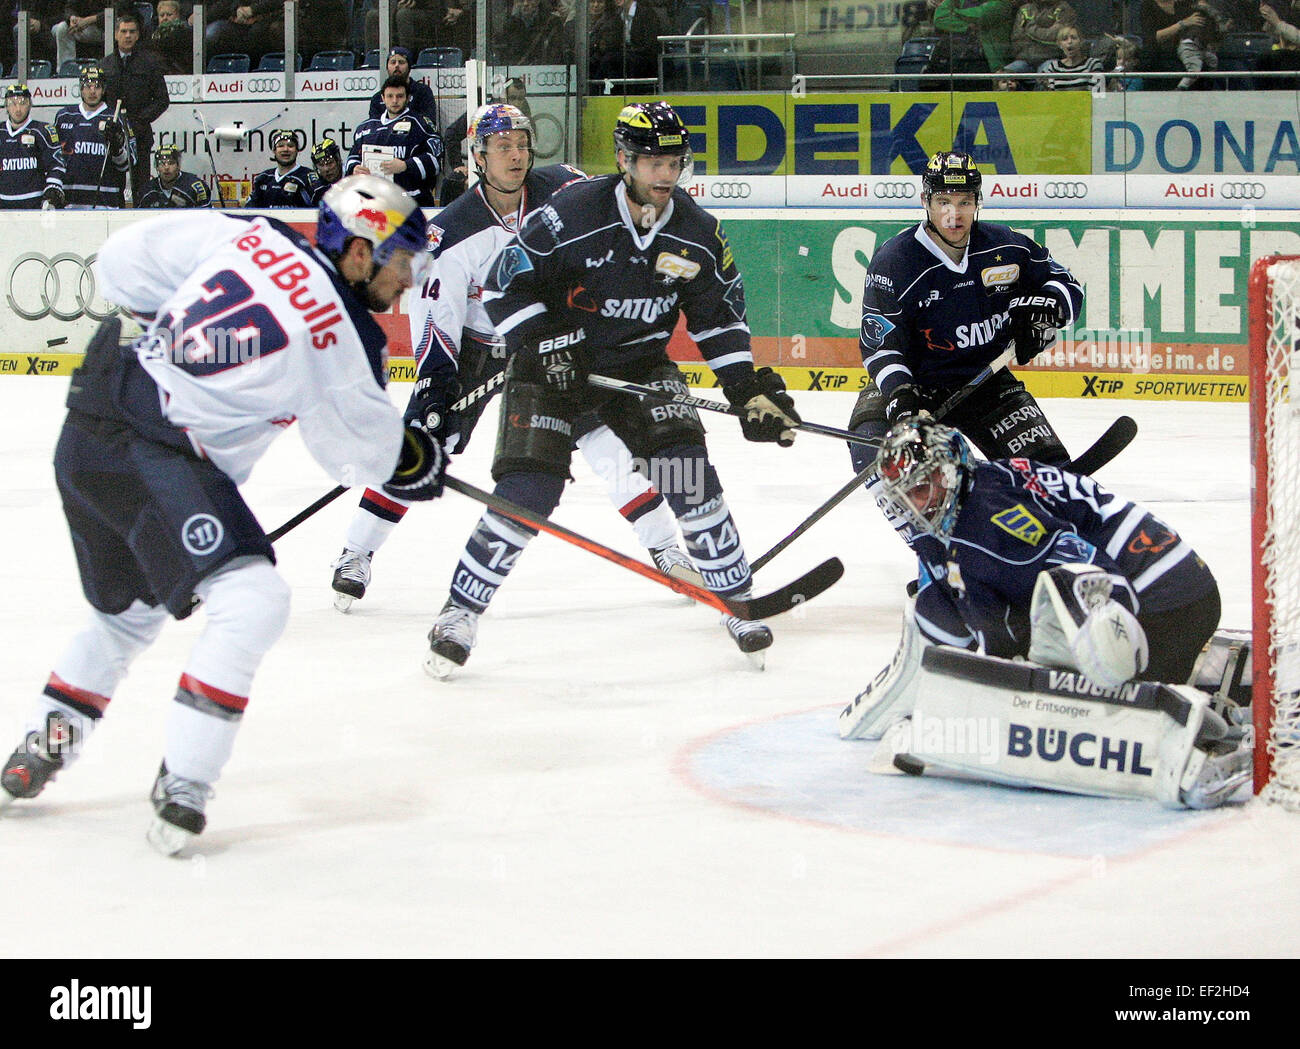 Ingolstadt, Bavaria, Germany. 25th Jan, 2015. from left in front Frandcois METHOT/CAN/Muenchen, 51goalkeeper Timo PIELMEIER/Ingolstadt, .German Hockey League, match day 42.ERC Ingolstadt vs Red Bull Muenchen, .Ingolstadt, Saturn Arena, January 25, 2015.the national champion Ingolstadt receives the team with the highest budget, sponsored by an Austrian drink enterprise. © Wolfgang Fehrmann/Wolfgang Fehrmann/ZUMA Wire/Alamy Live News Stock Photo